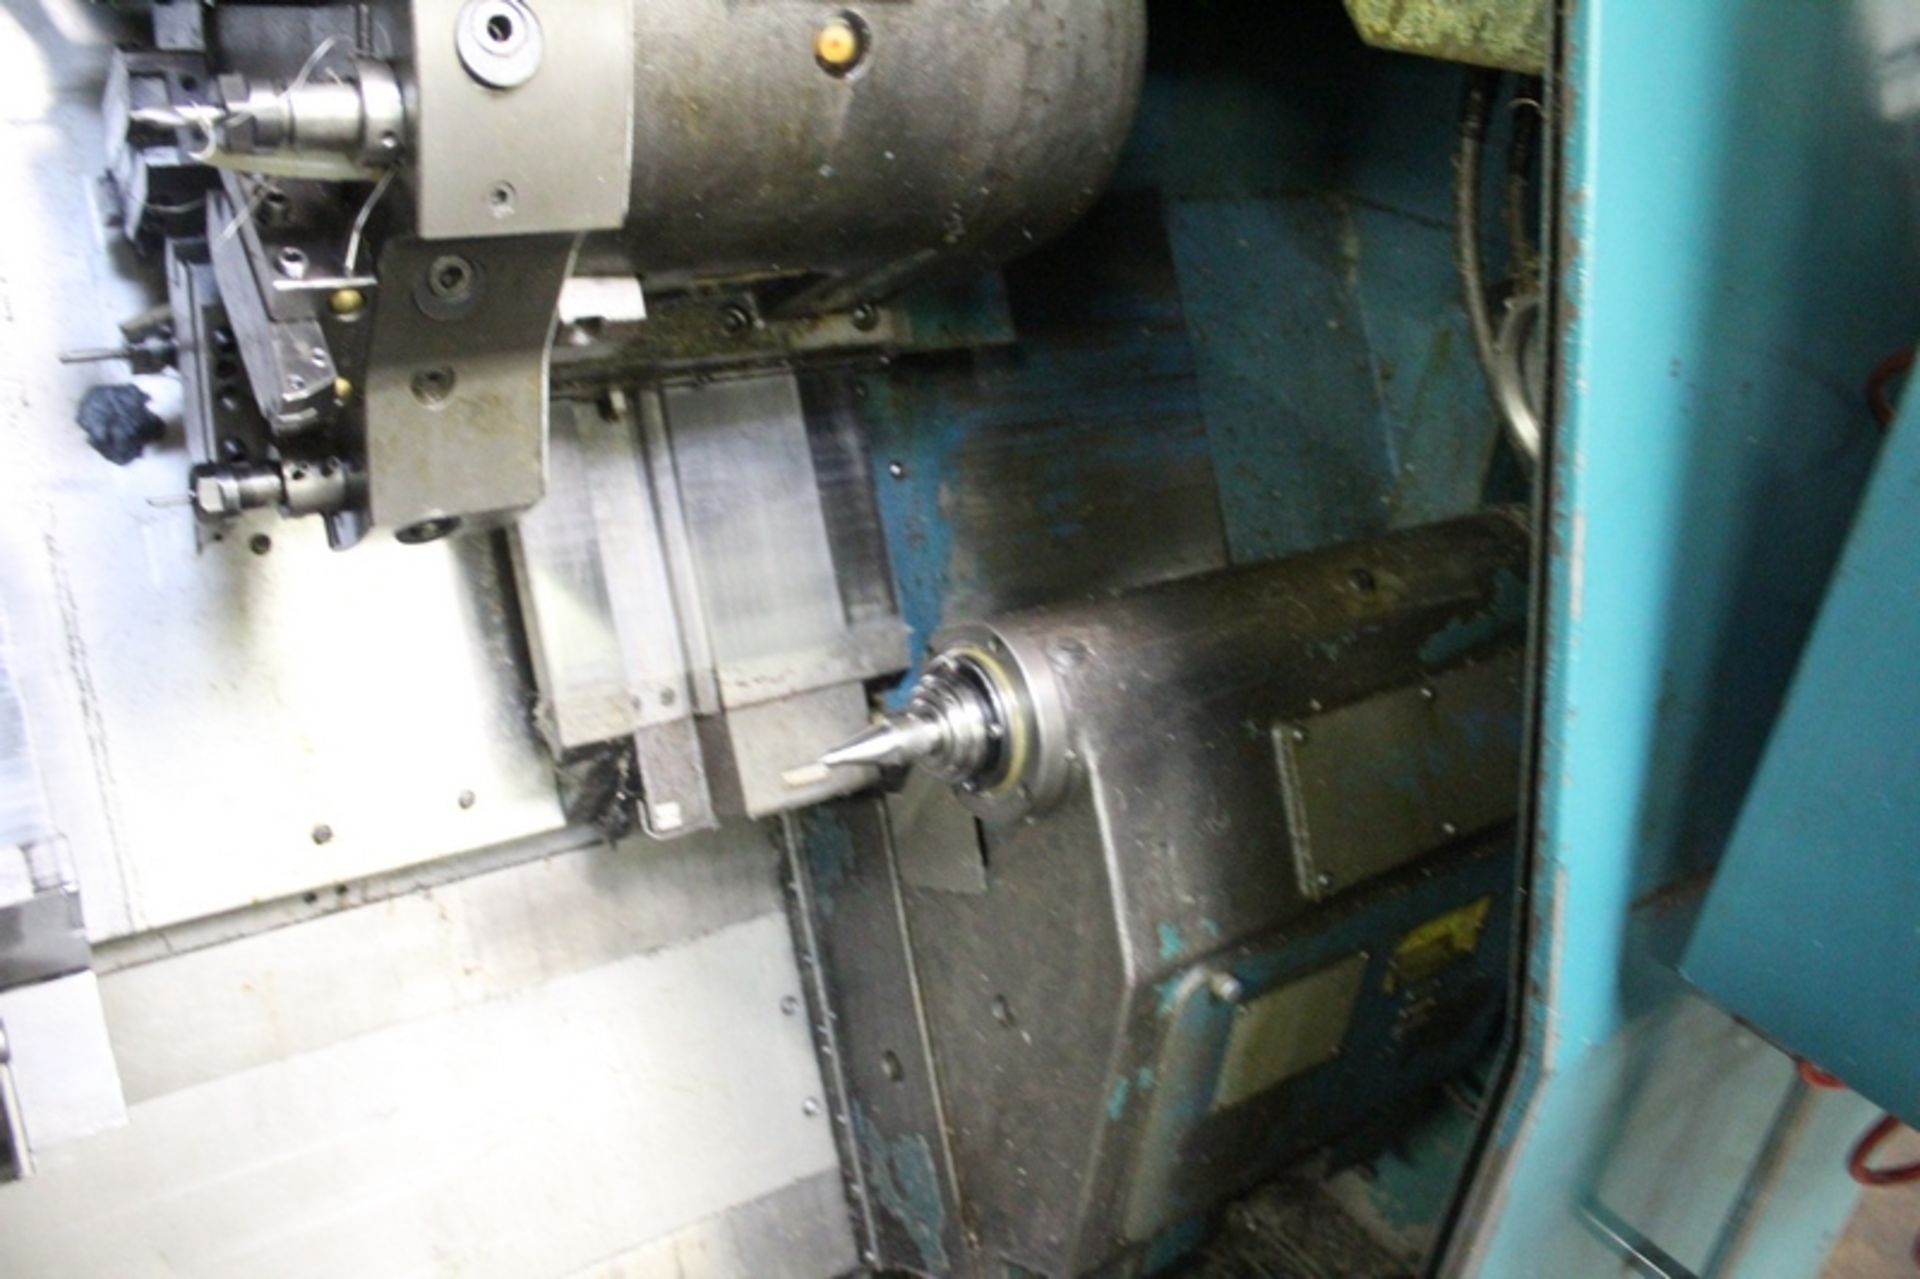 NAKAMURA TOME PRECISION TYPE S-1 CNC TURNING CENTER, S/N 020406, 16” SWING, 16” CENTERS, FANUC - Image 5 of 7